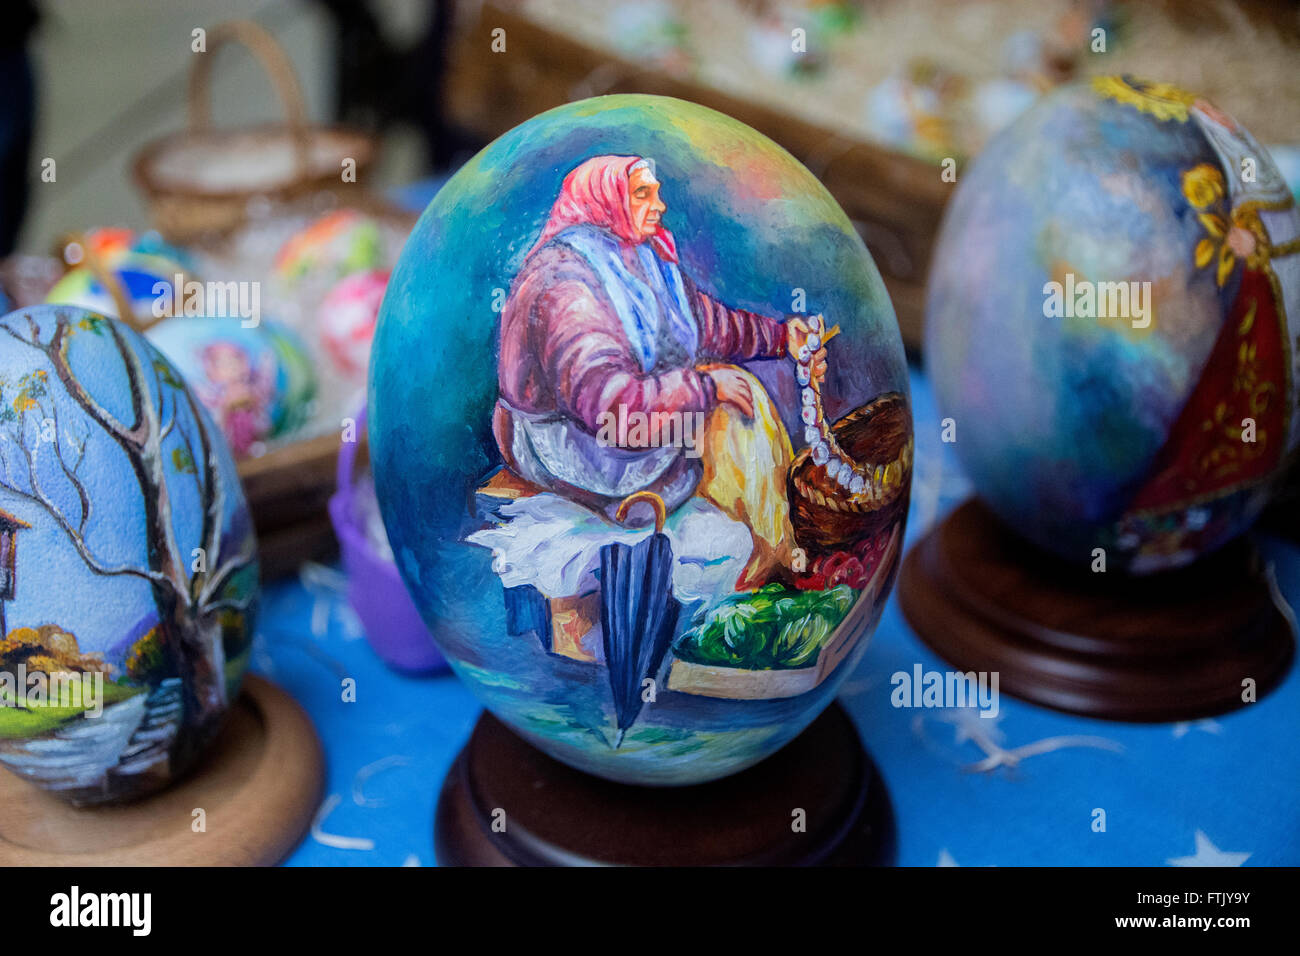 Pola de Siero, Spain. 29th March, 2016. A painted goose egg which represents an old women at the Feast of Easter Eggs of Pola de Siero, the only Spanish city in which this feast is celebrated, on the first Tuesday after Easter Sunday, with thousands of eggs painted by hand. © David Gato/Alamy Live News Stock Photo